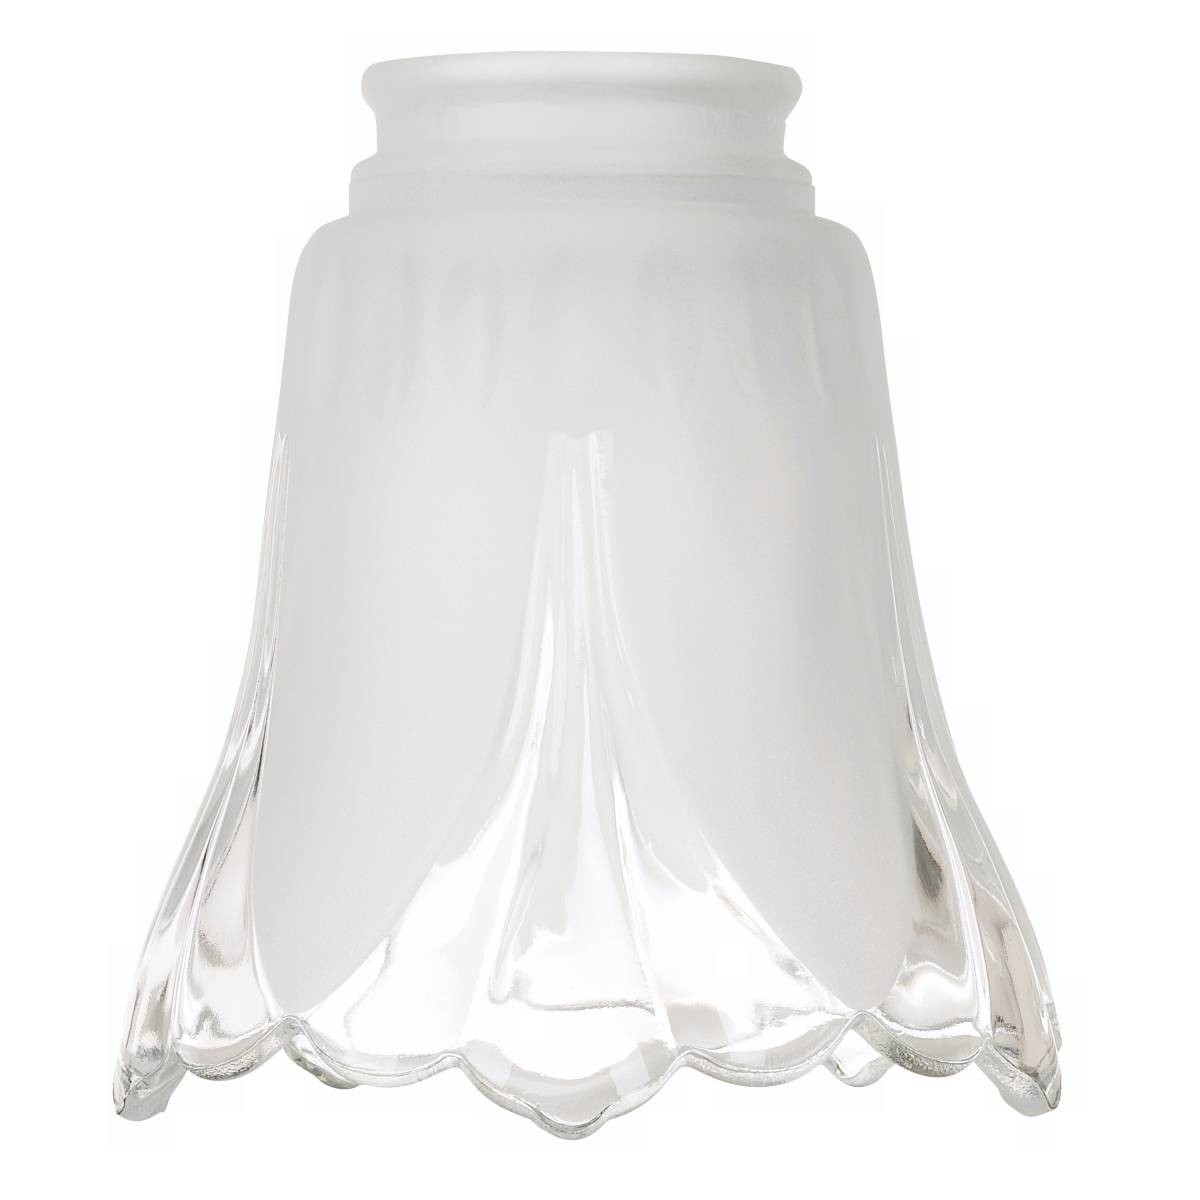 Glass Lamp Shade Replacement Foter